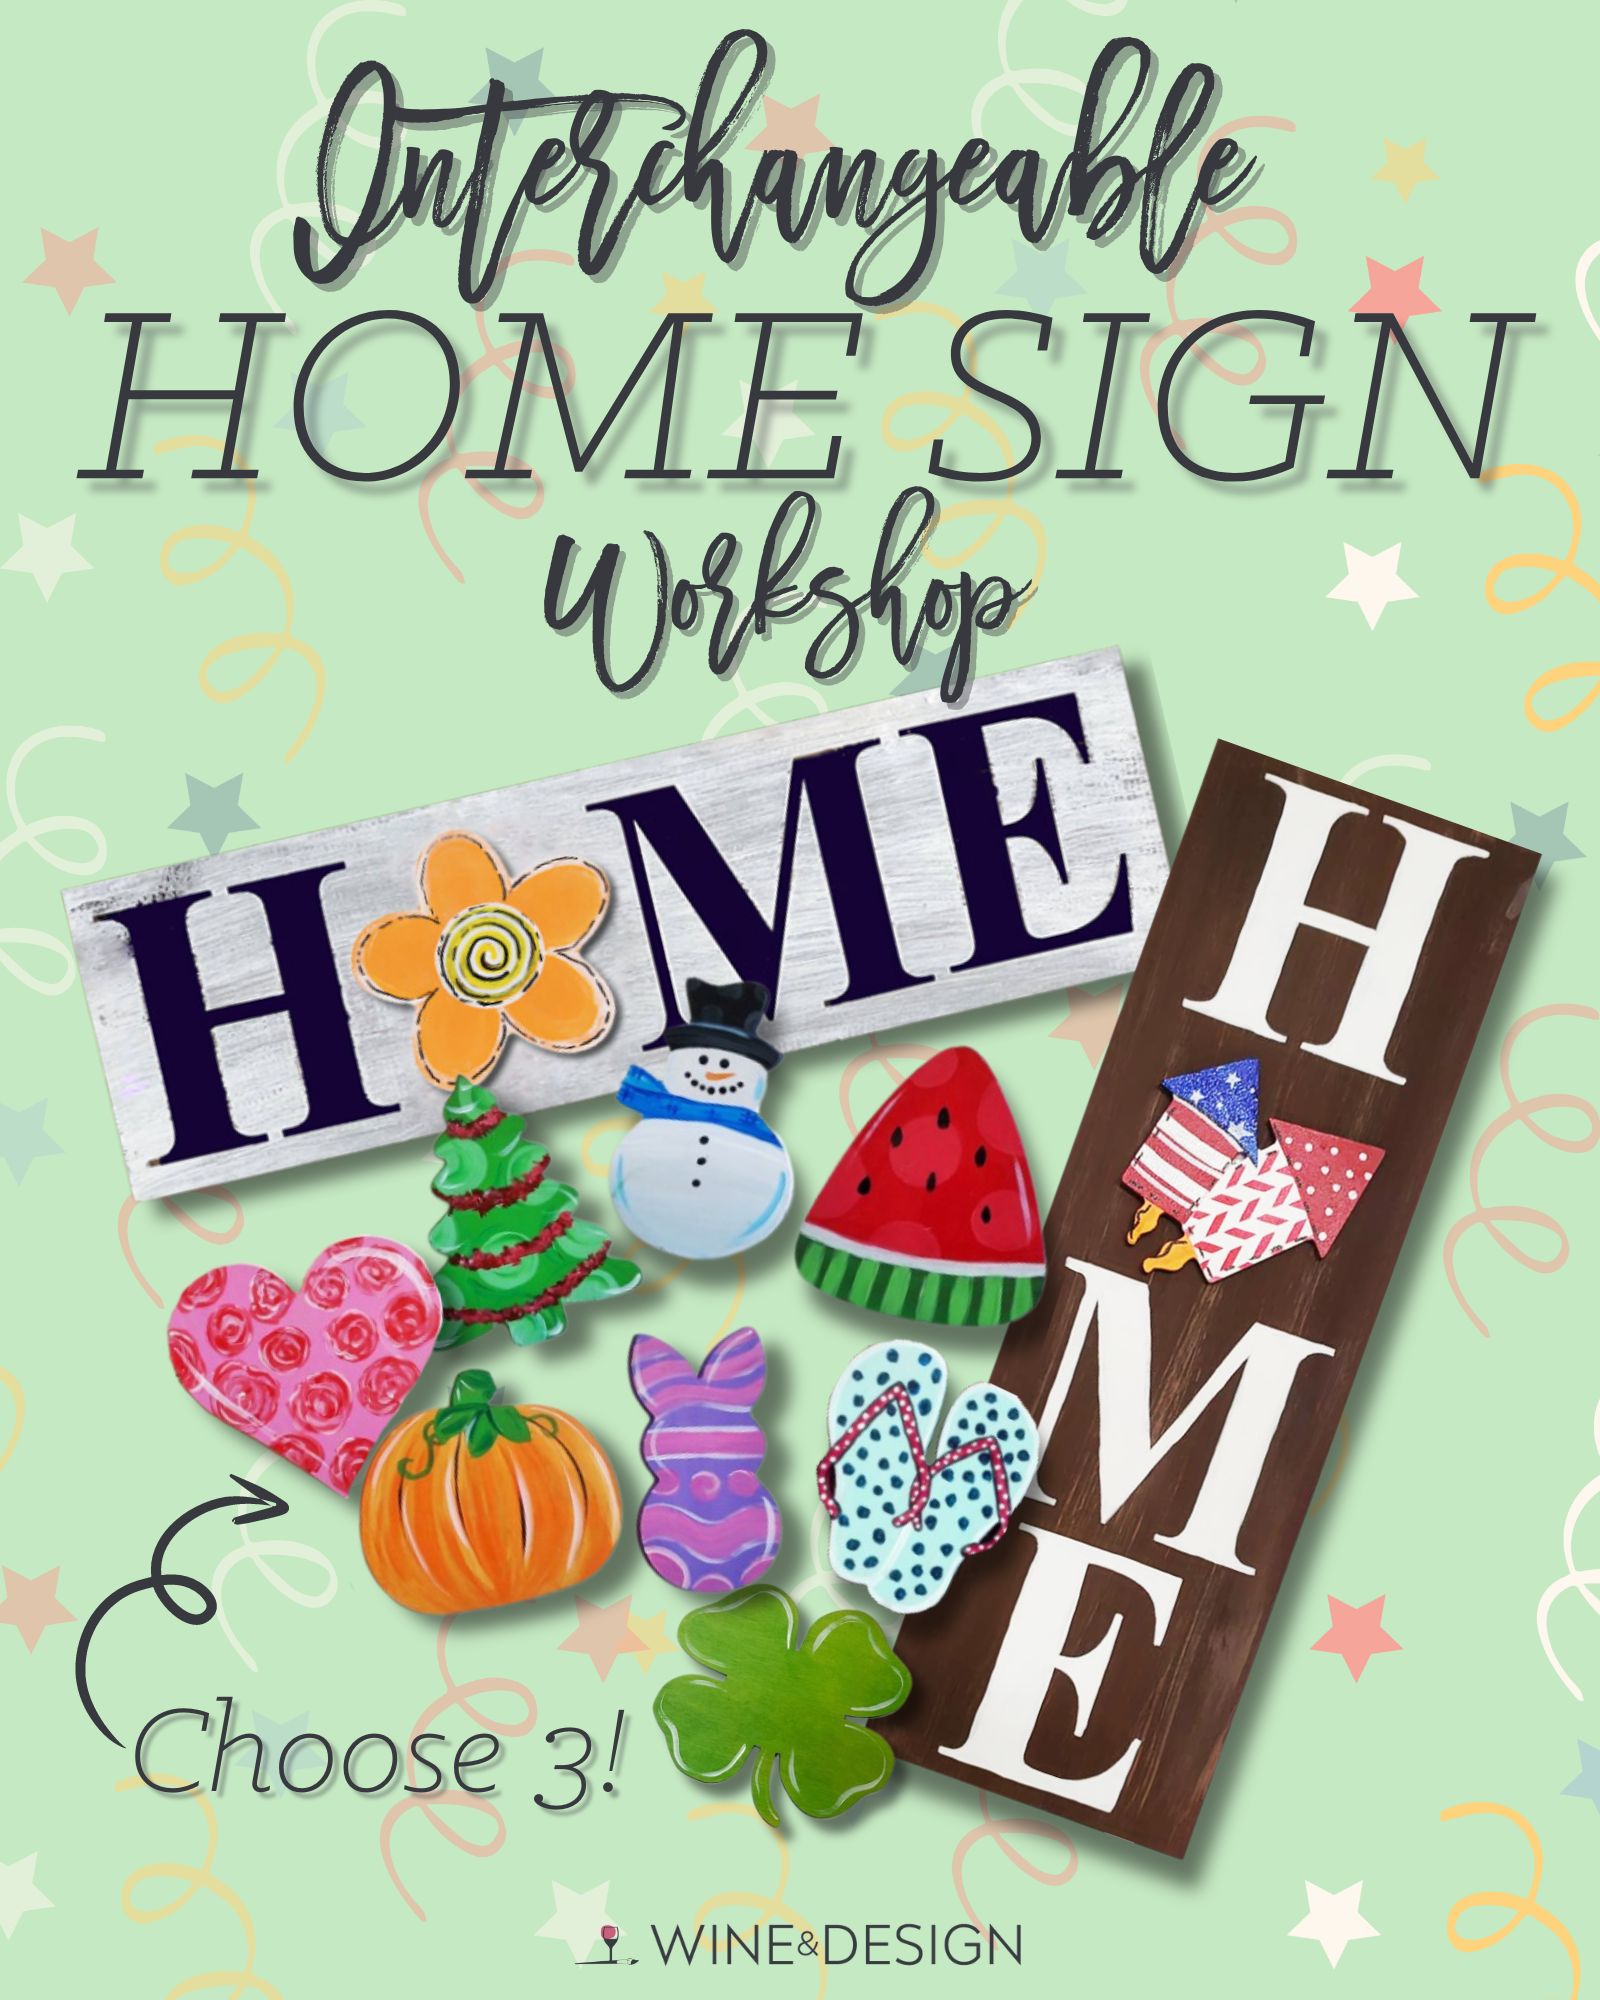 Interchangeable Home Sign (3 Shapes Included) | Please Read Event Description